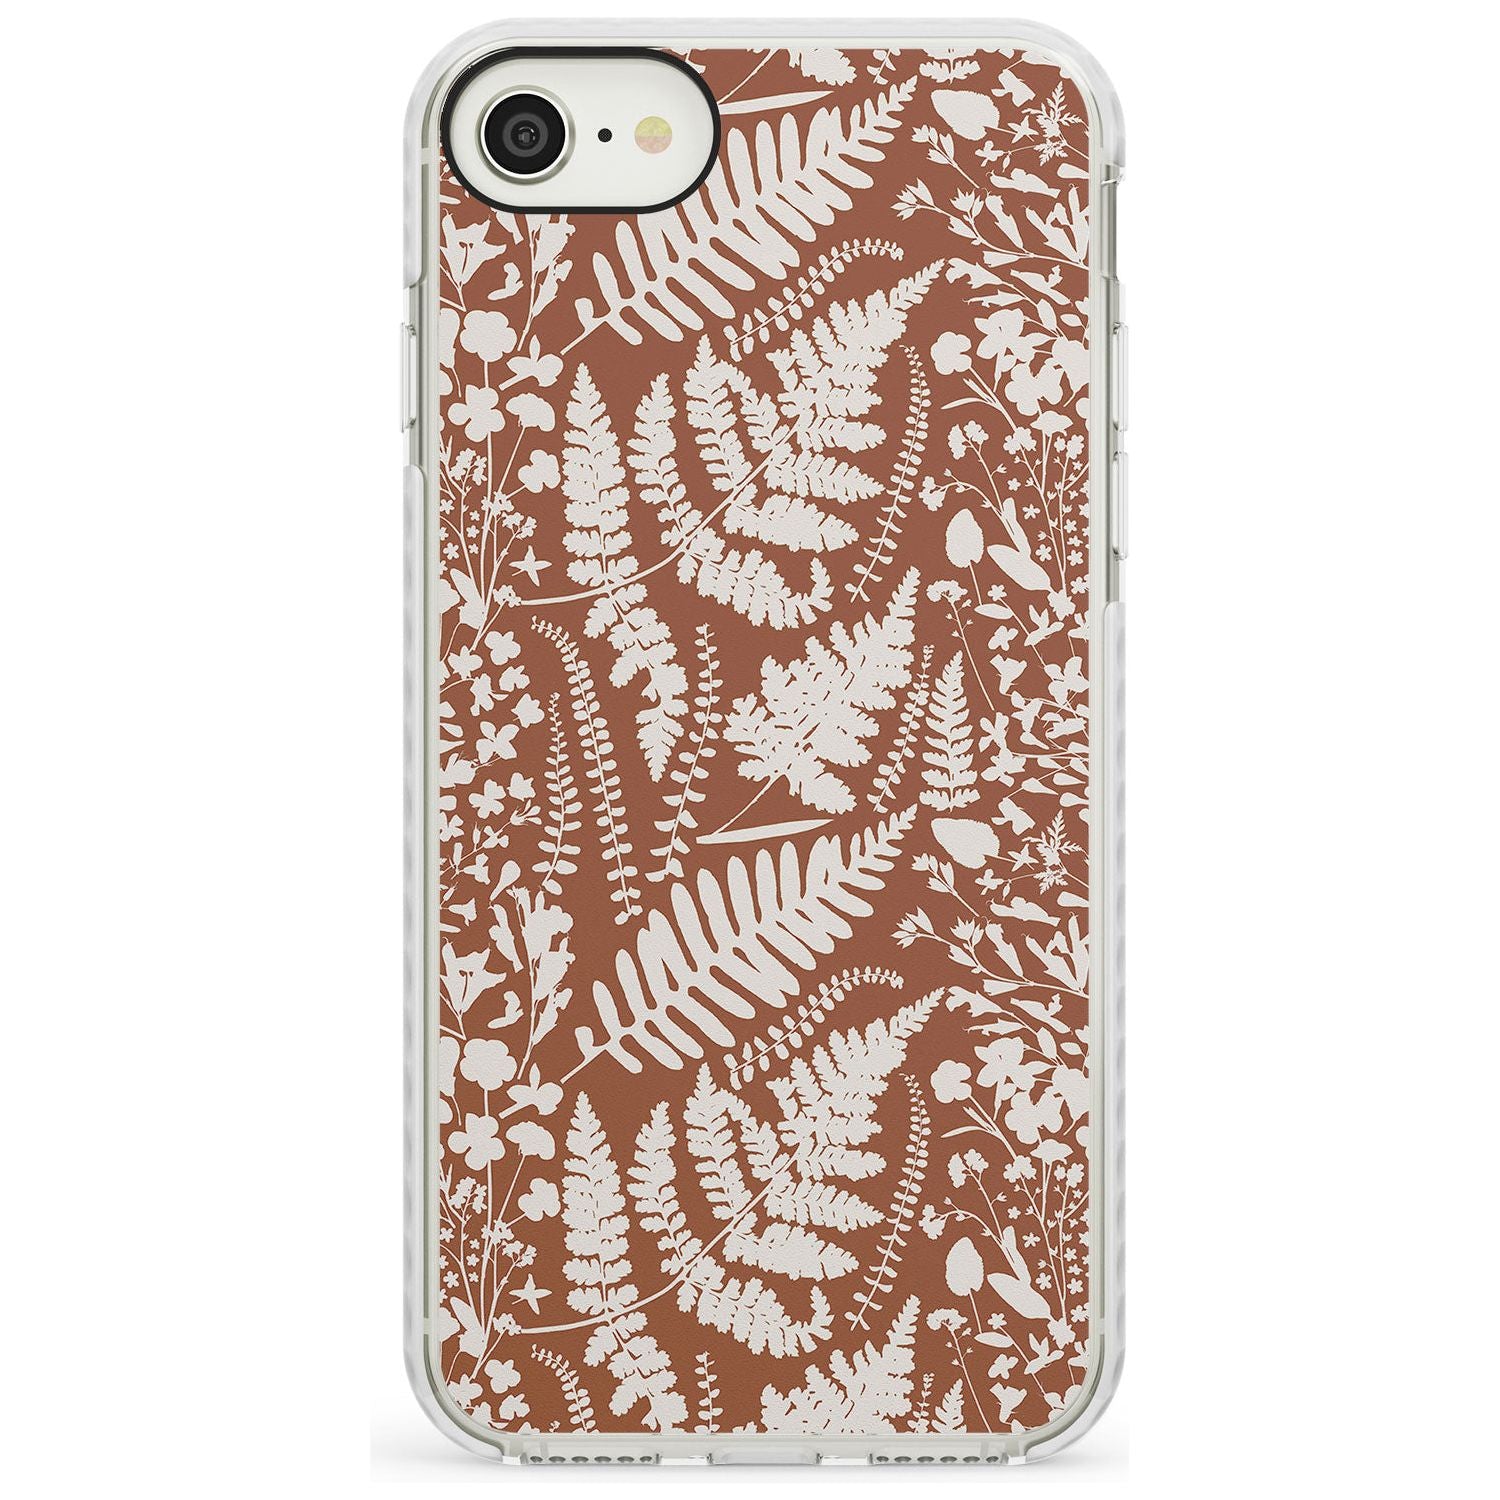 Wildflowers and Ferns on Terracotta Impact Phone Case for iPhone SE 8 7 Plus